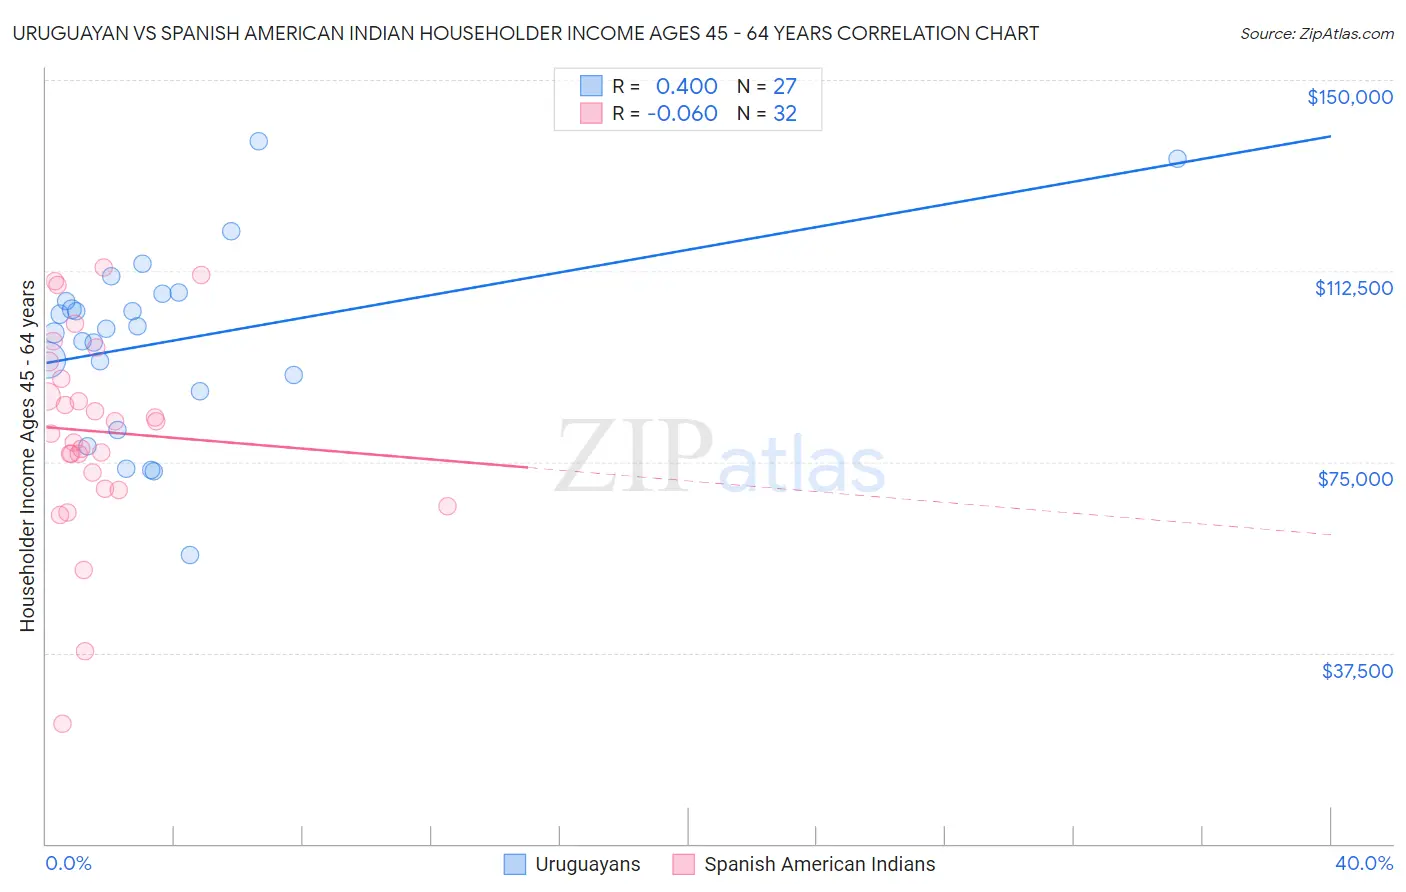 Uruguayan vs Spanish American Indian Householder Income Ages 45 - 64 years